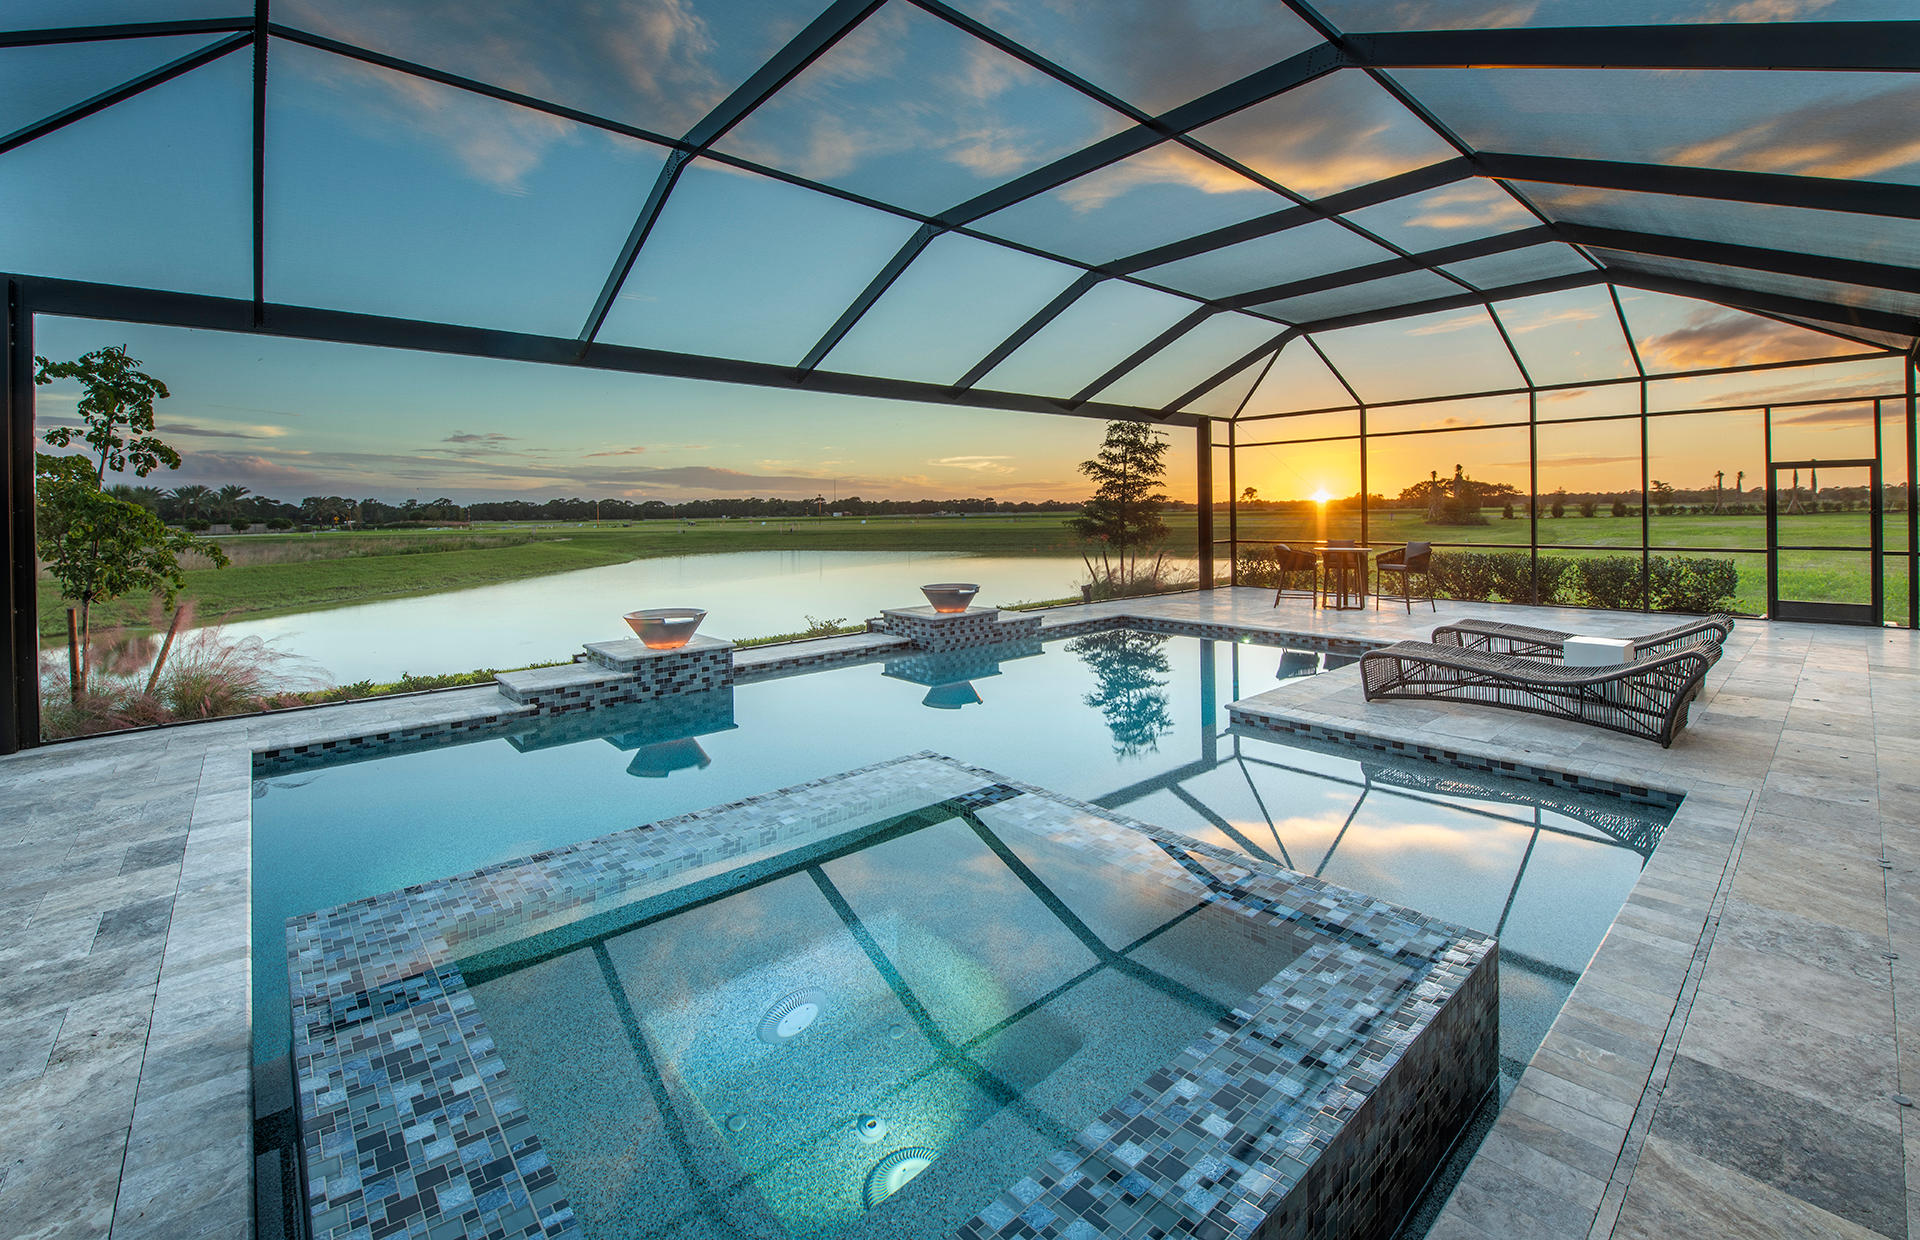 Ideal indoor and outdoor living space with optional pool and spa upgrades